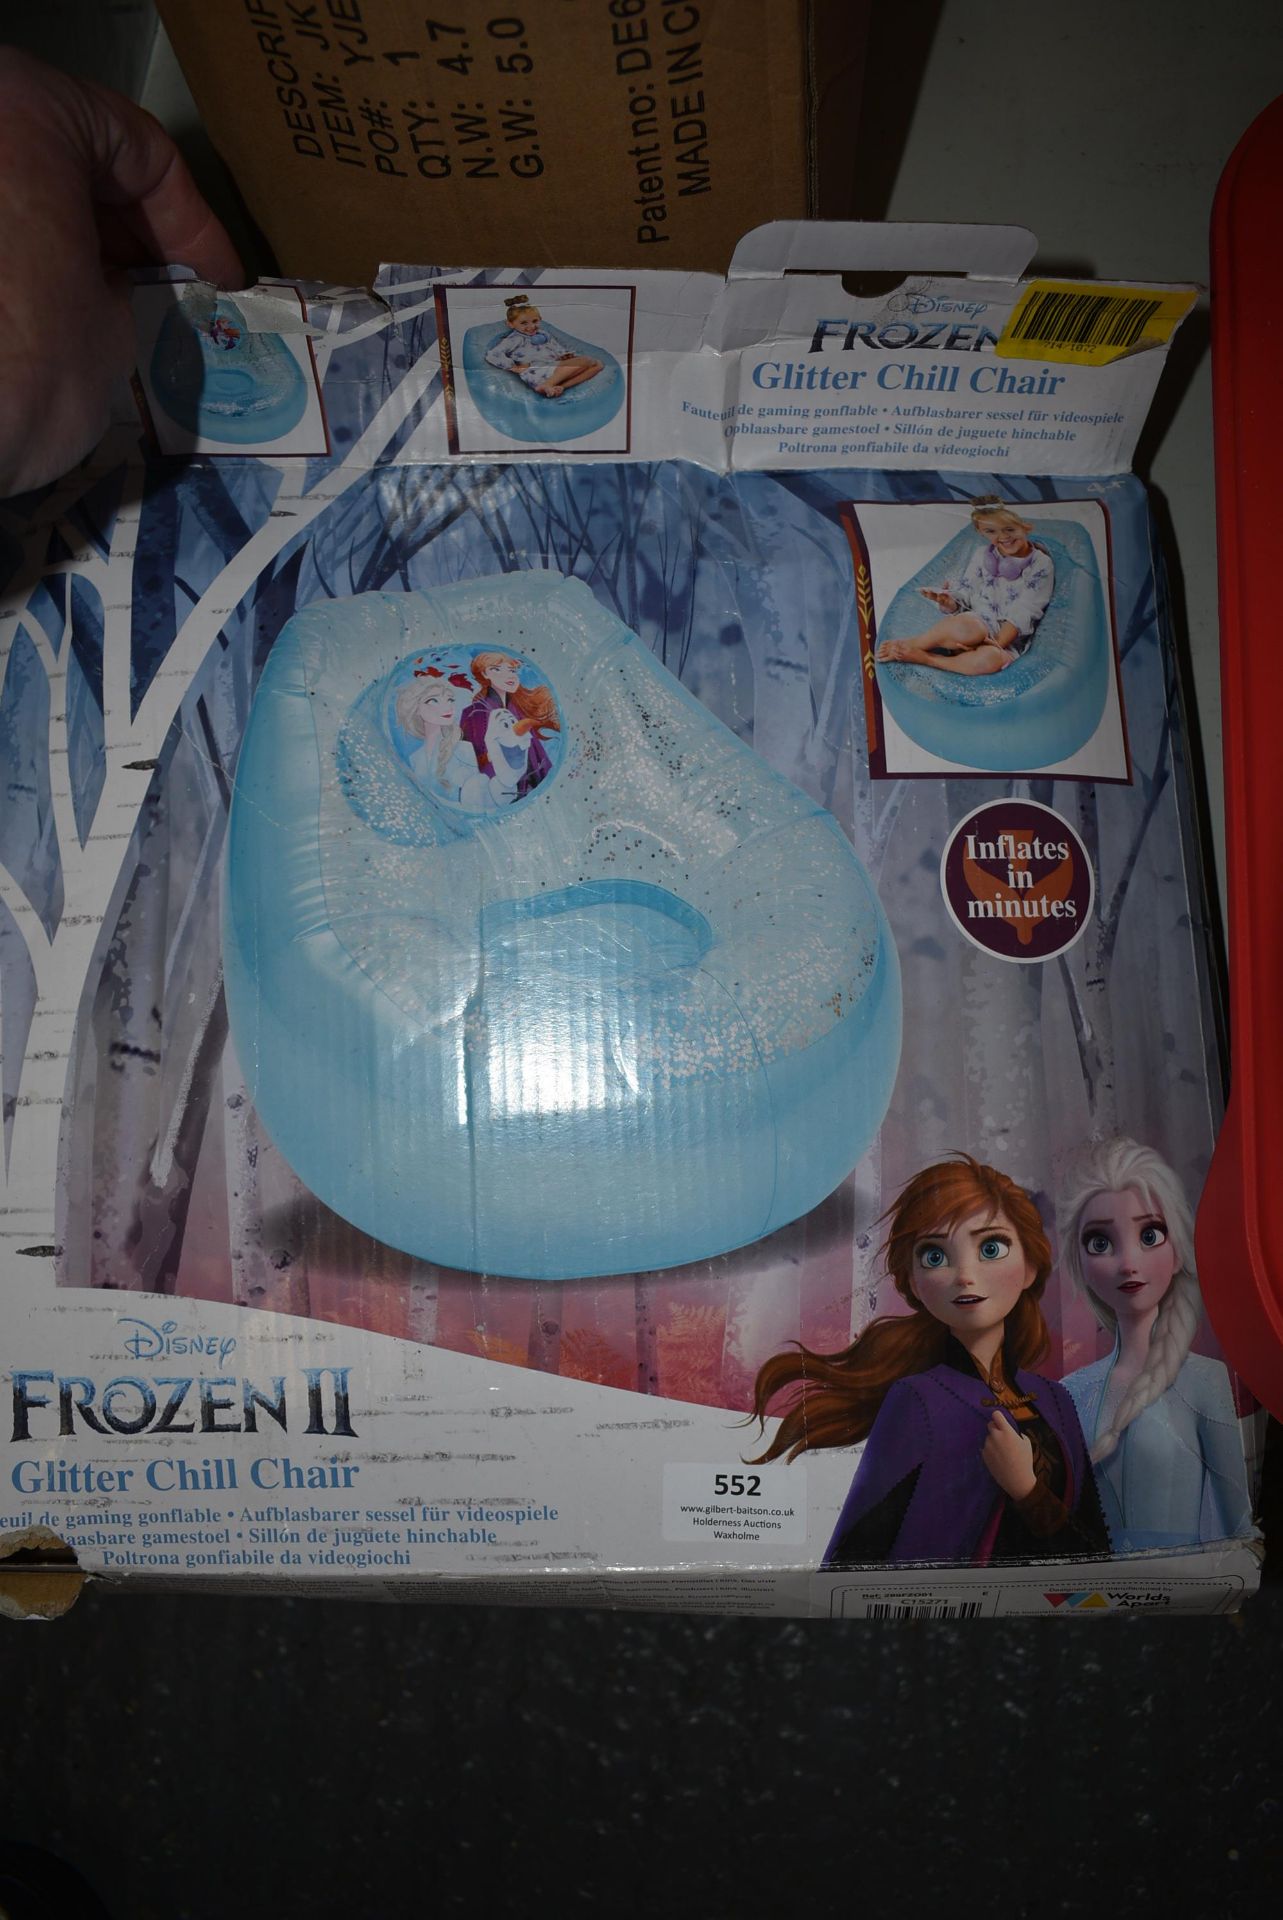 Frozen 2 Glitter Chill Chair - Image 2 of 2